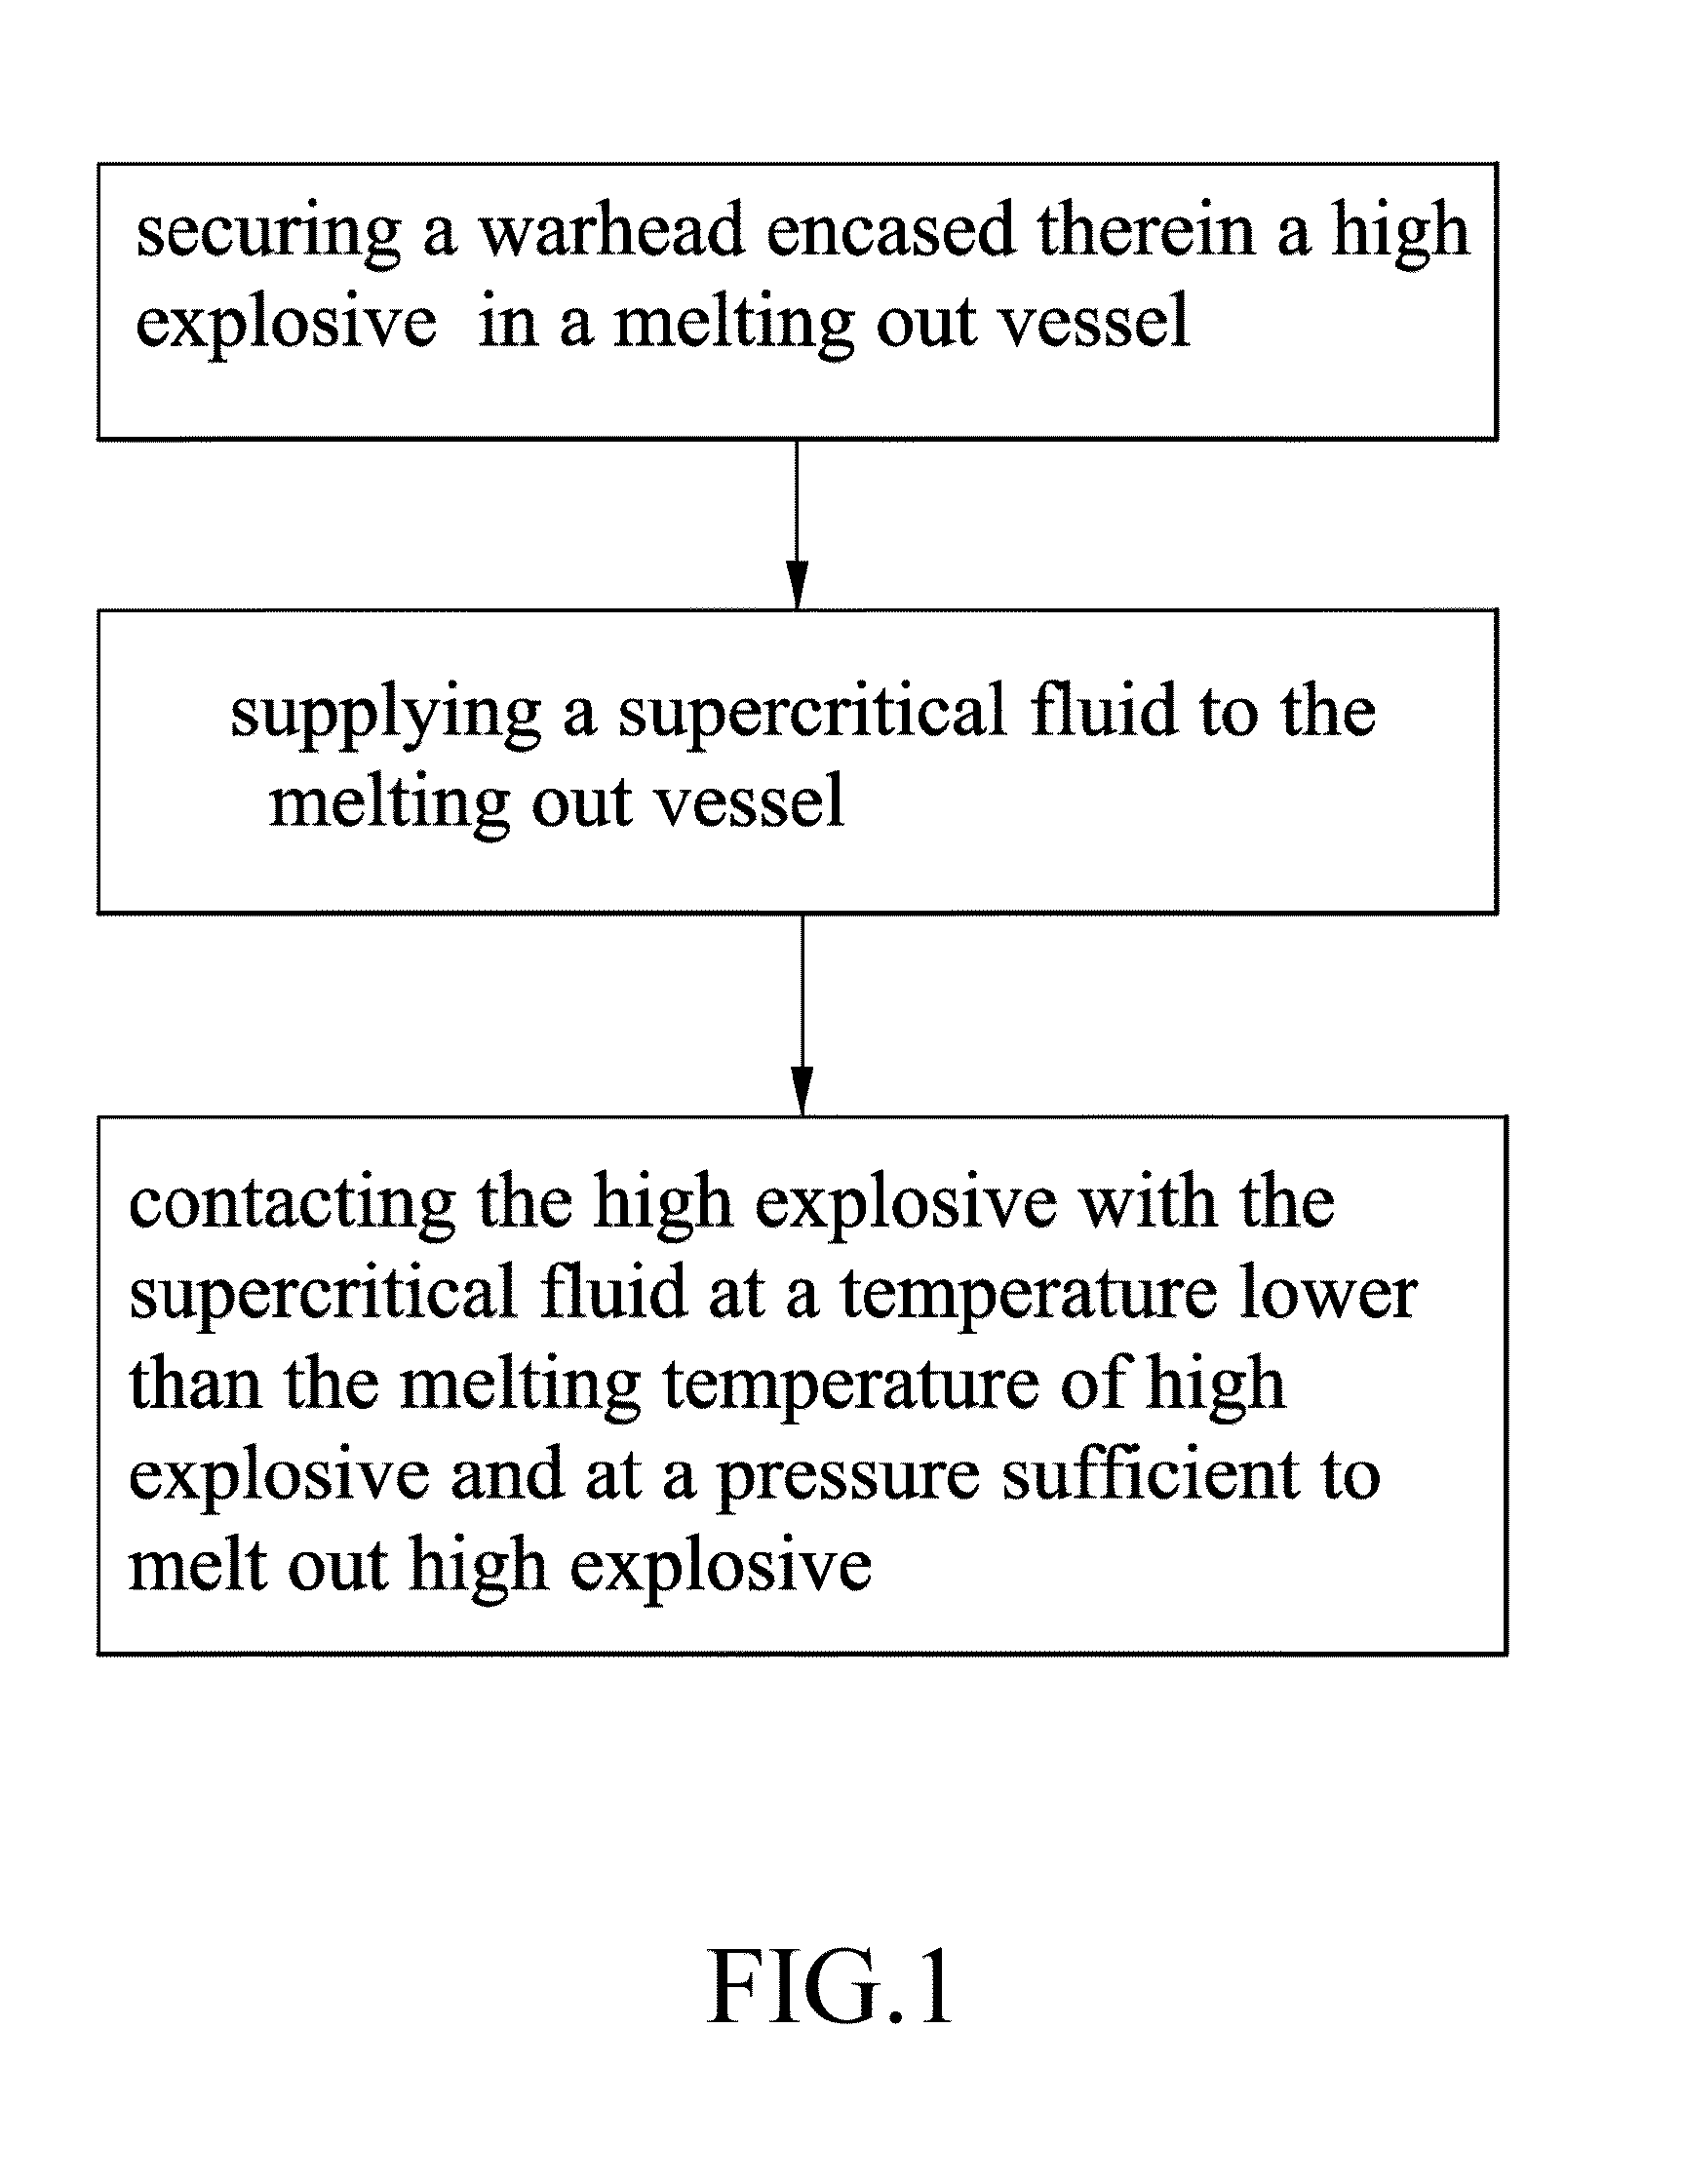 Method for reclaiming high explosive from warhead by melting-out in supercritical fluid